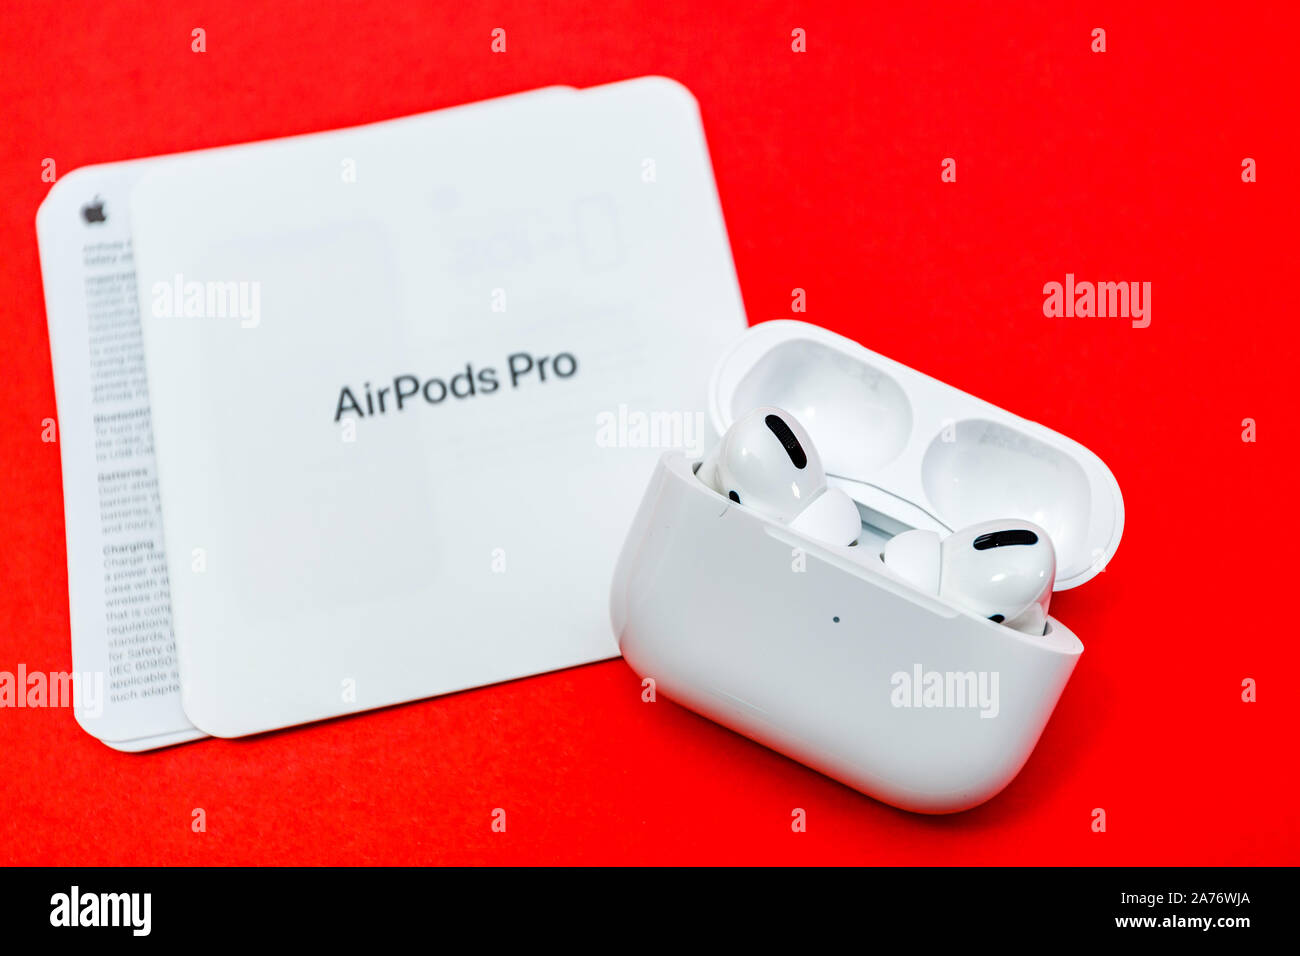 Paris, France - Oct 30, 2019: Unboxing unpacking of the new Apple Computers  AirPods Pro headphones with Active Noise Cancellation for immersive sound  Stock Photo - Alamy